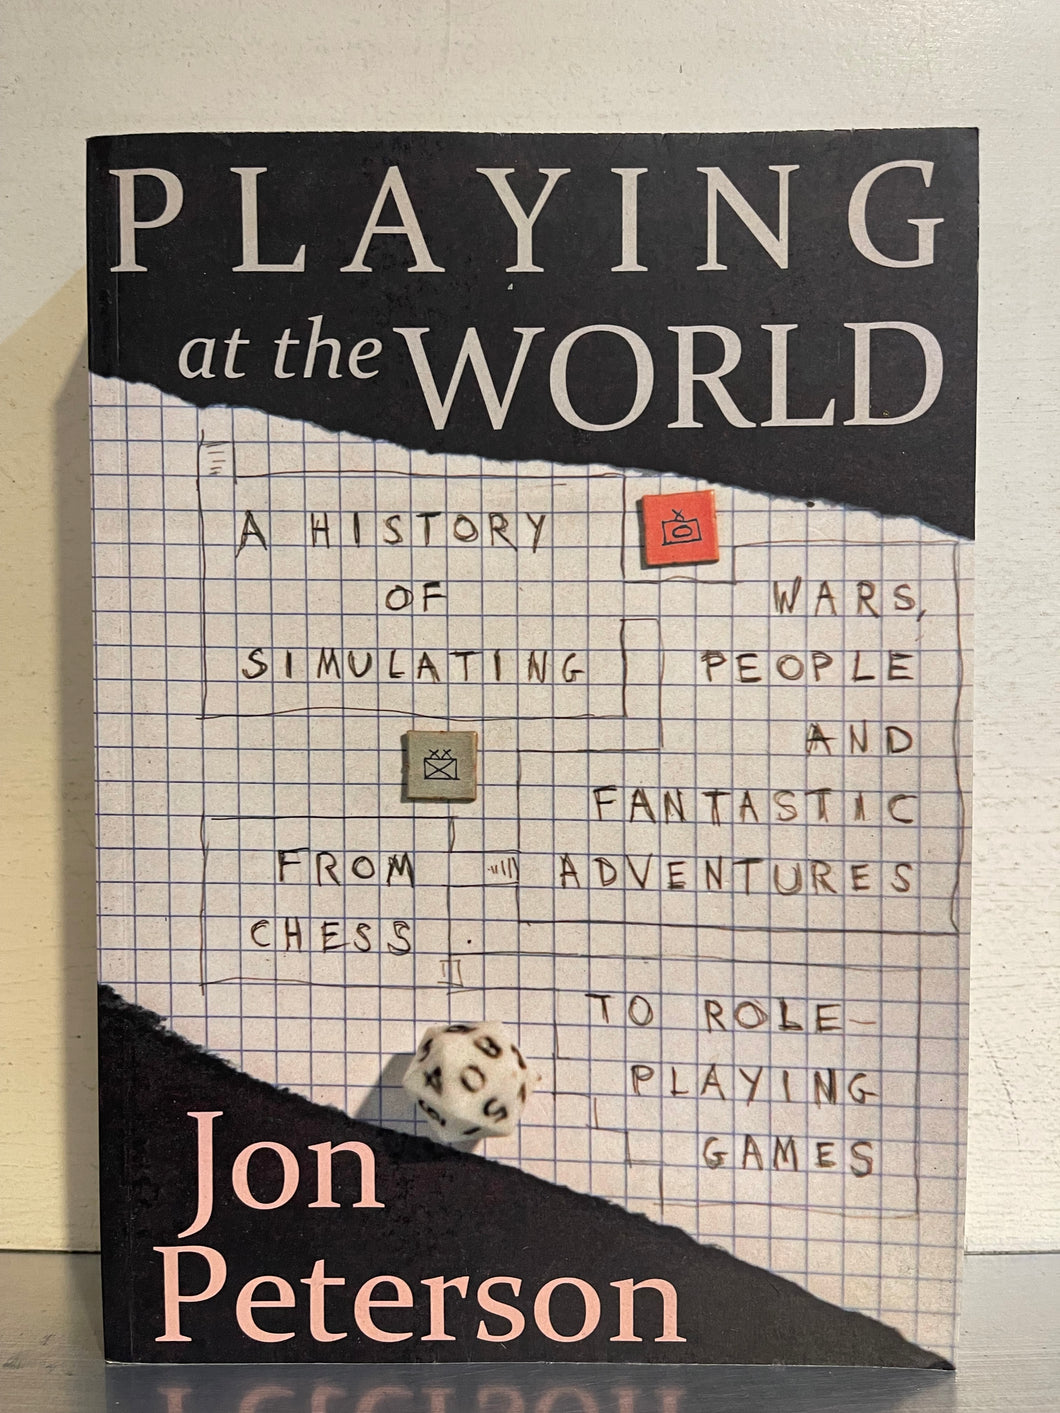 Playing at the World: A History of Simulating Wars, People and Fantastic Adventures, from Chess to Role-Playing Games